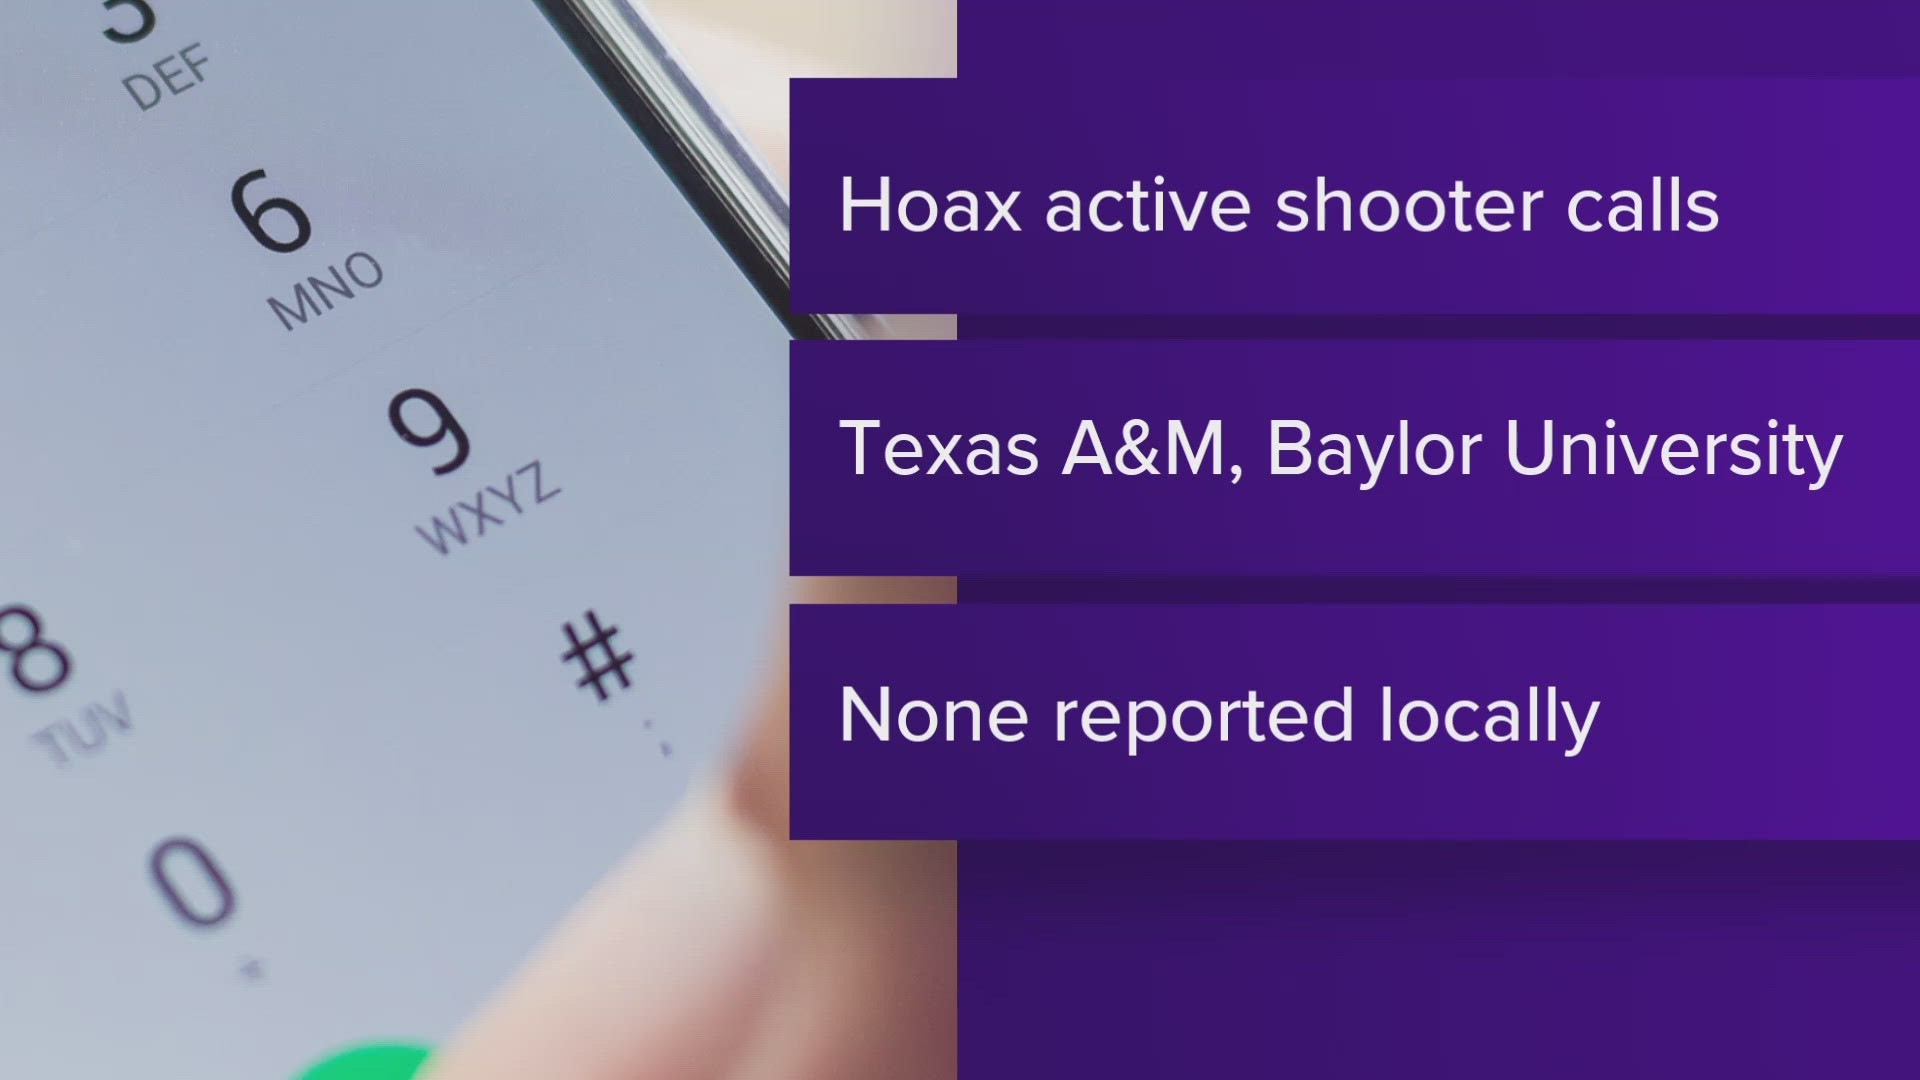 Several Texas college and university campuses reported receiving hoax 911 calls Thursday, claiming there was an active shooter situation.